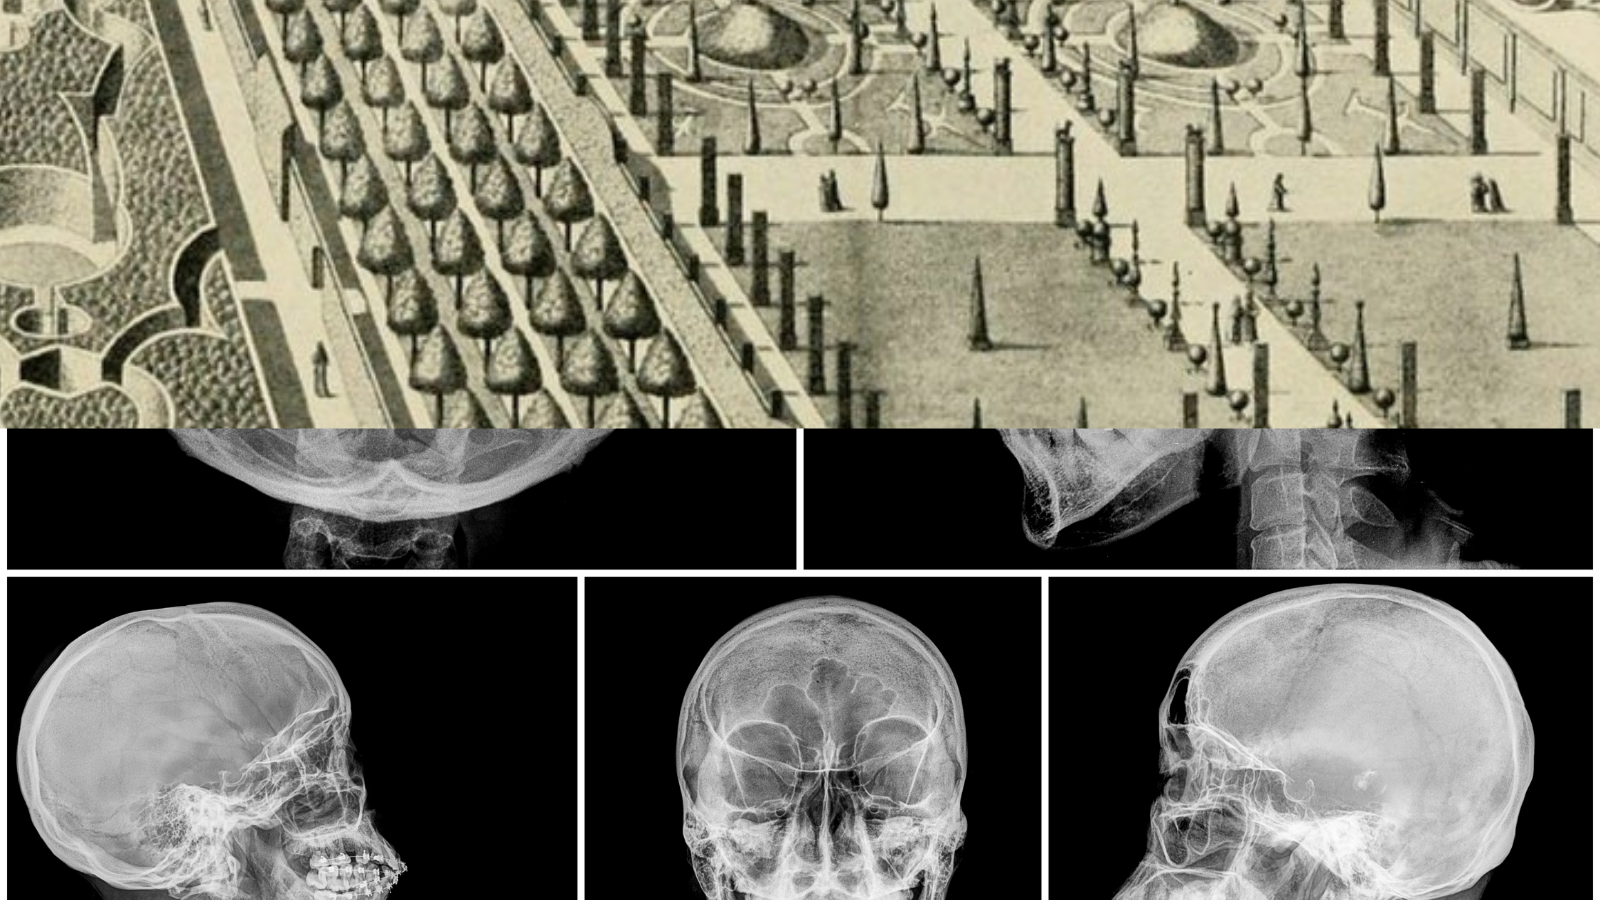 The top half of this collaged image is a black & white drawing of a large and orderly garden, and the bottom half is an x-ray of a human skull from multiple angles.